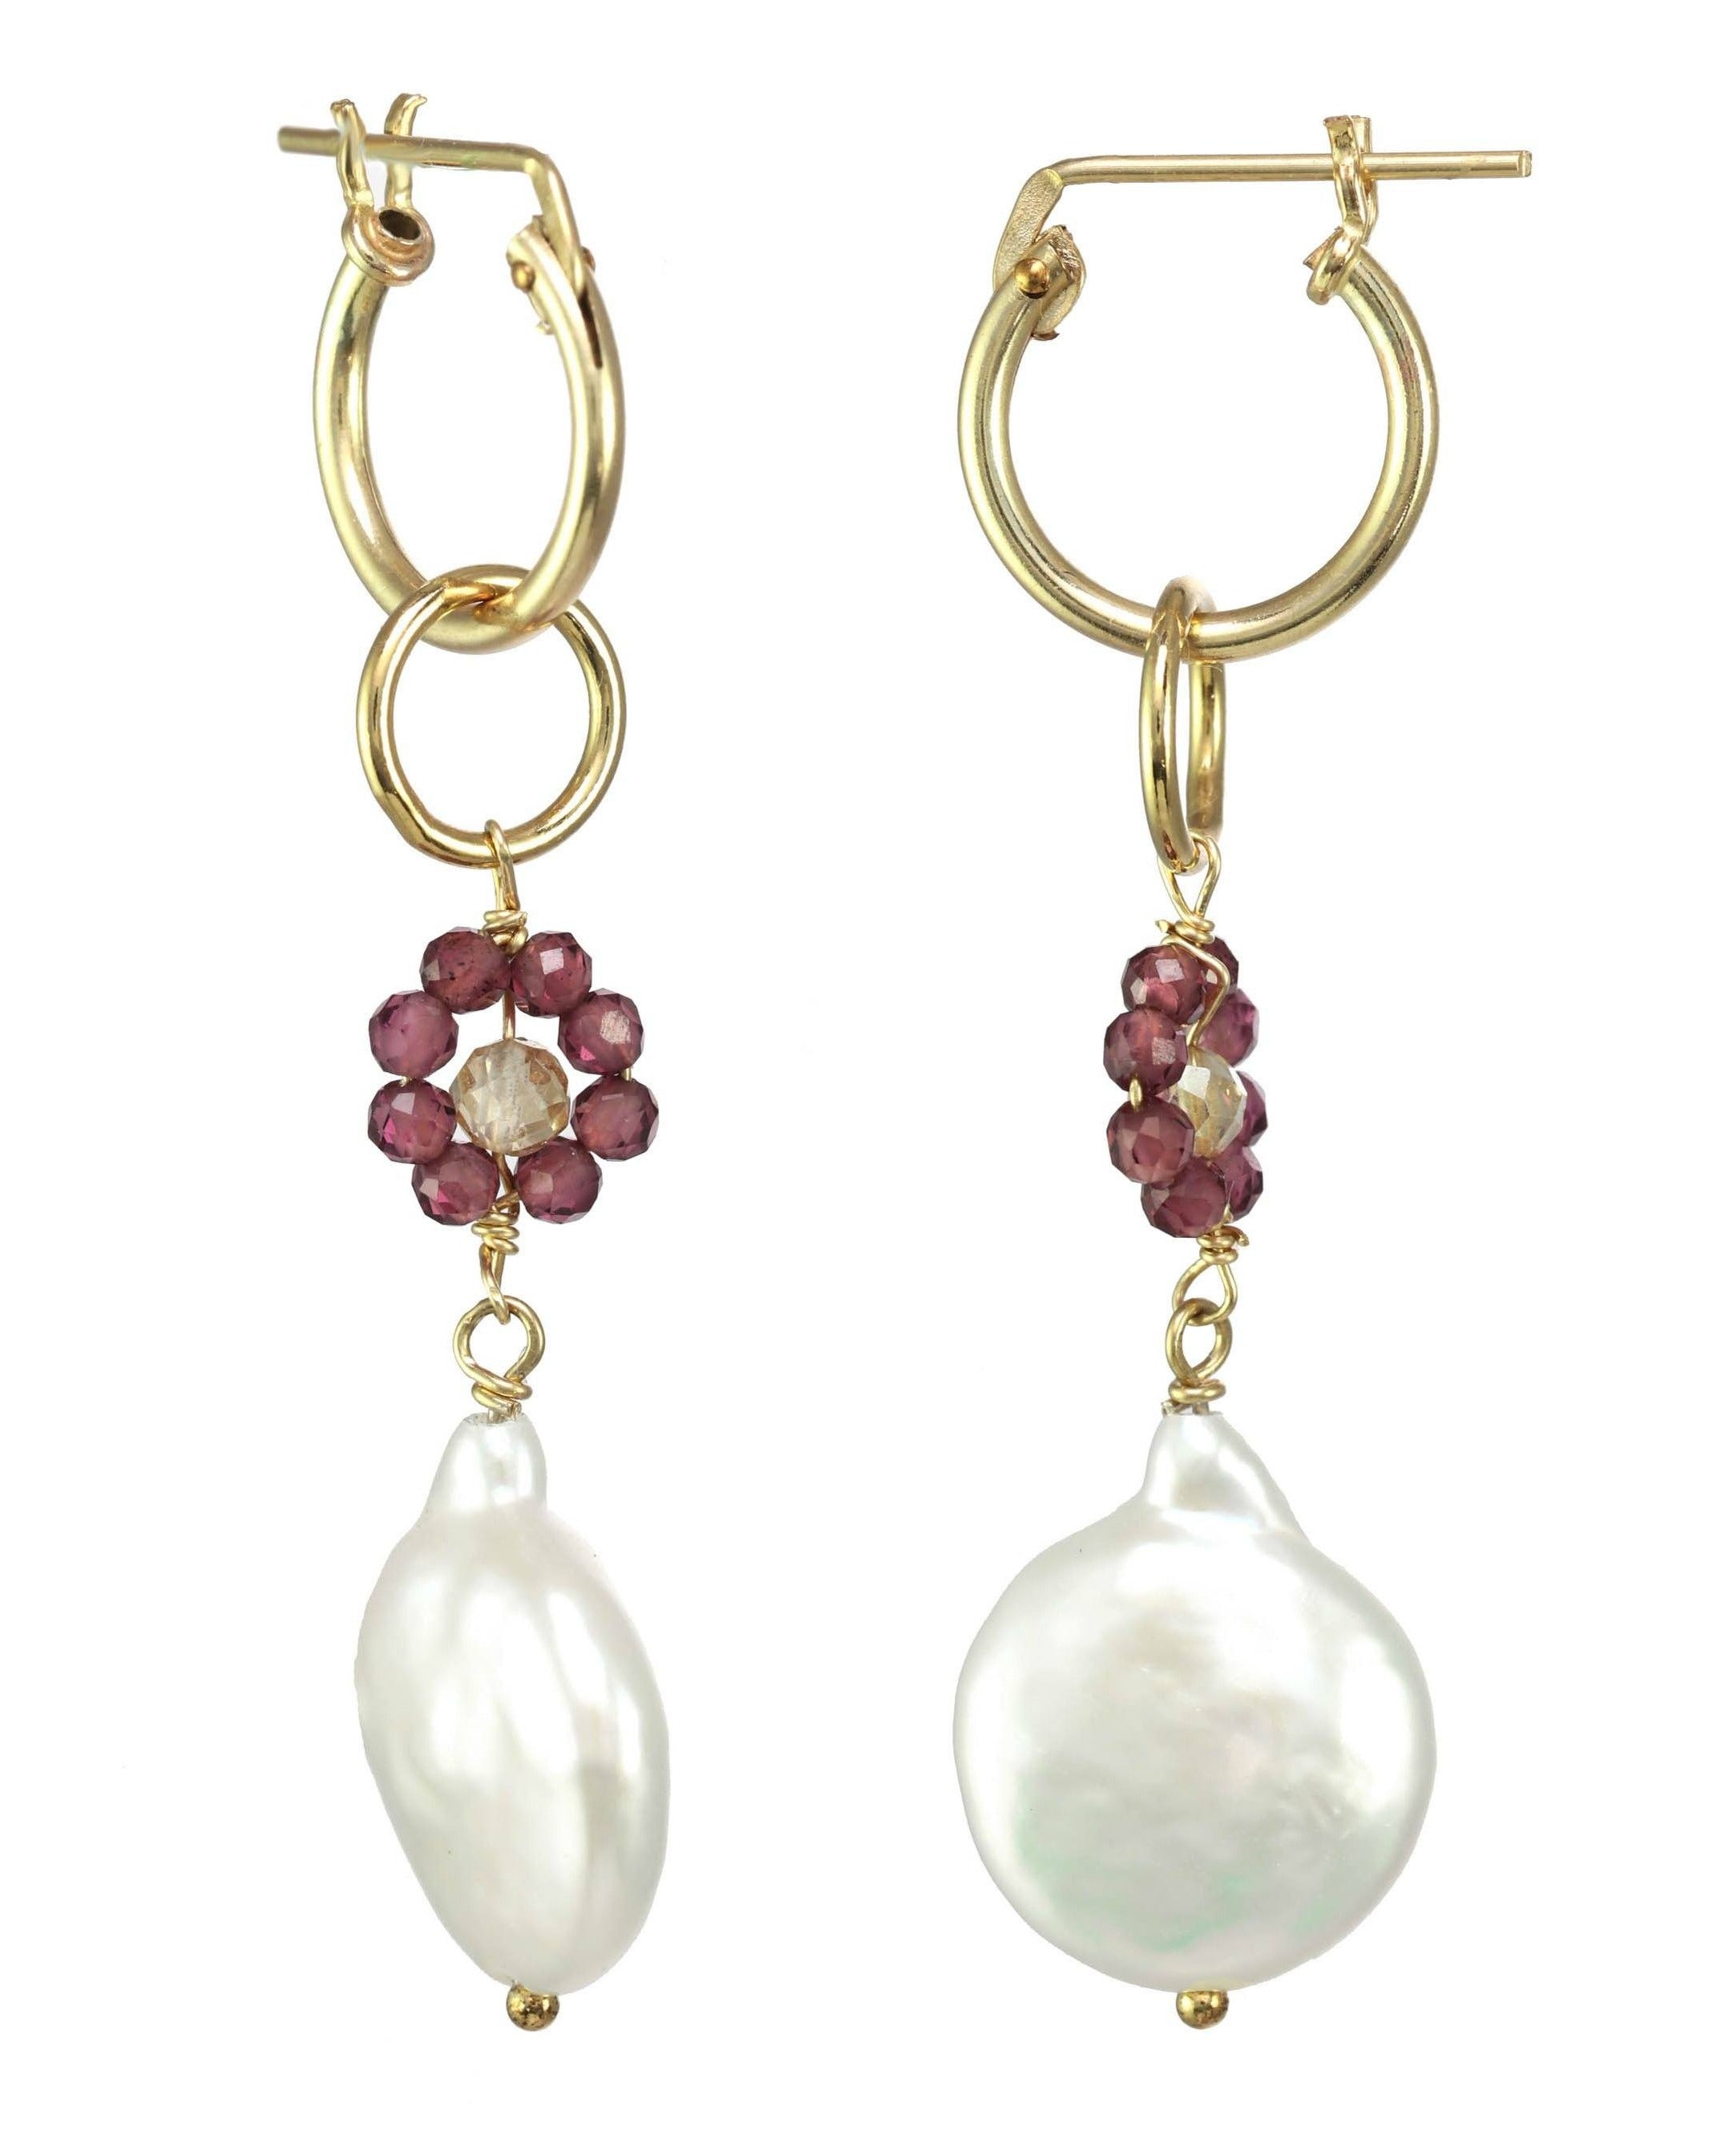 Daisy Del Mar Earrings by Kozakh. 12mm Snap closure hoops crafted in 14K Gold Filled, featuring 2mm Garnet and 3mm Imperial Topaz forming a flower charm, and a Baroque Pearl.